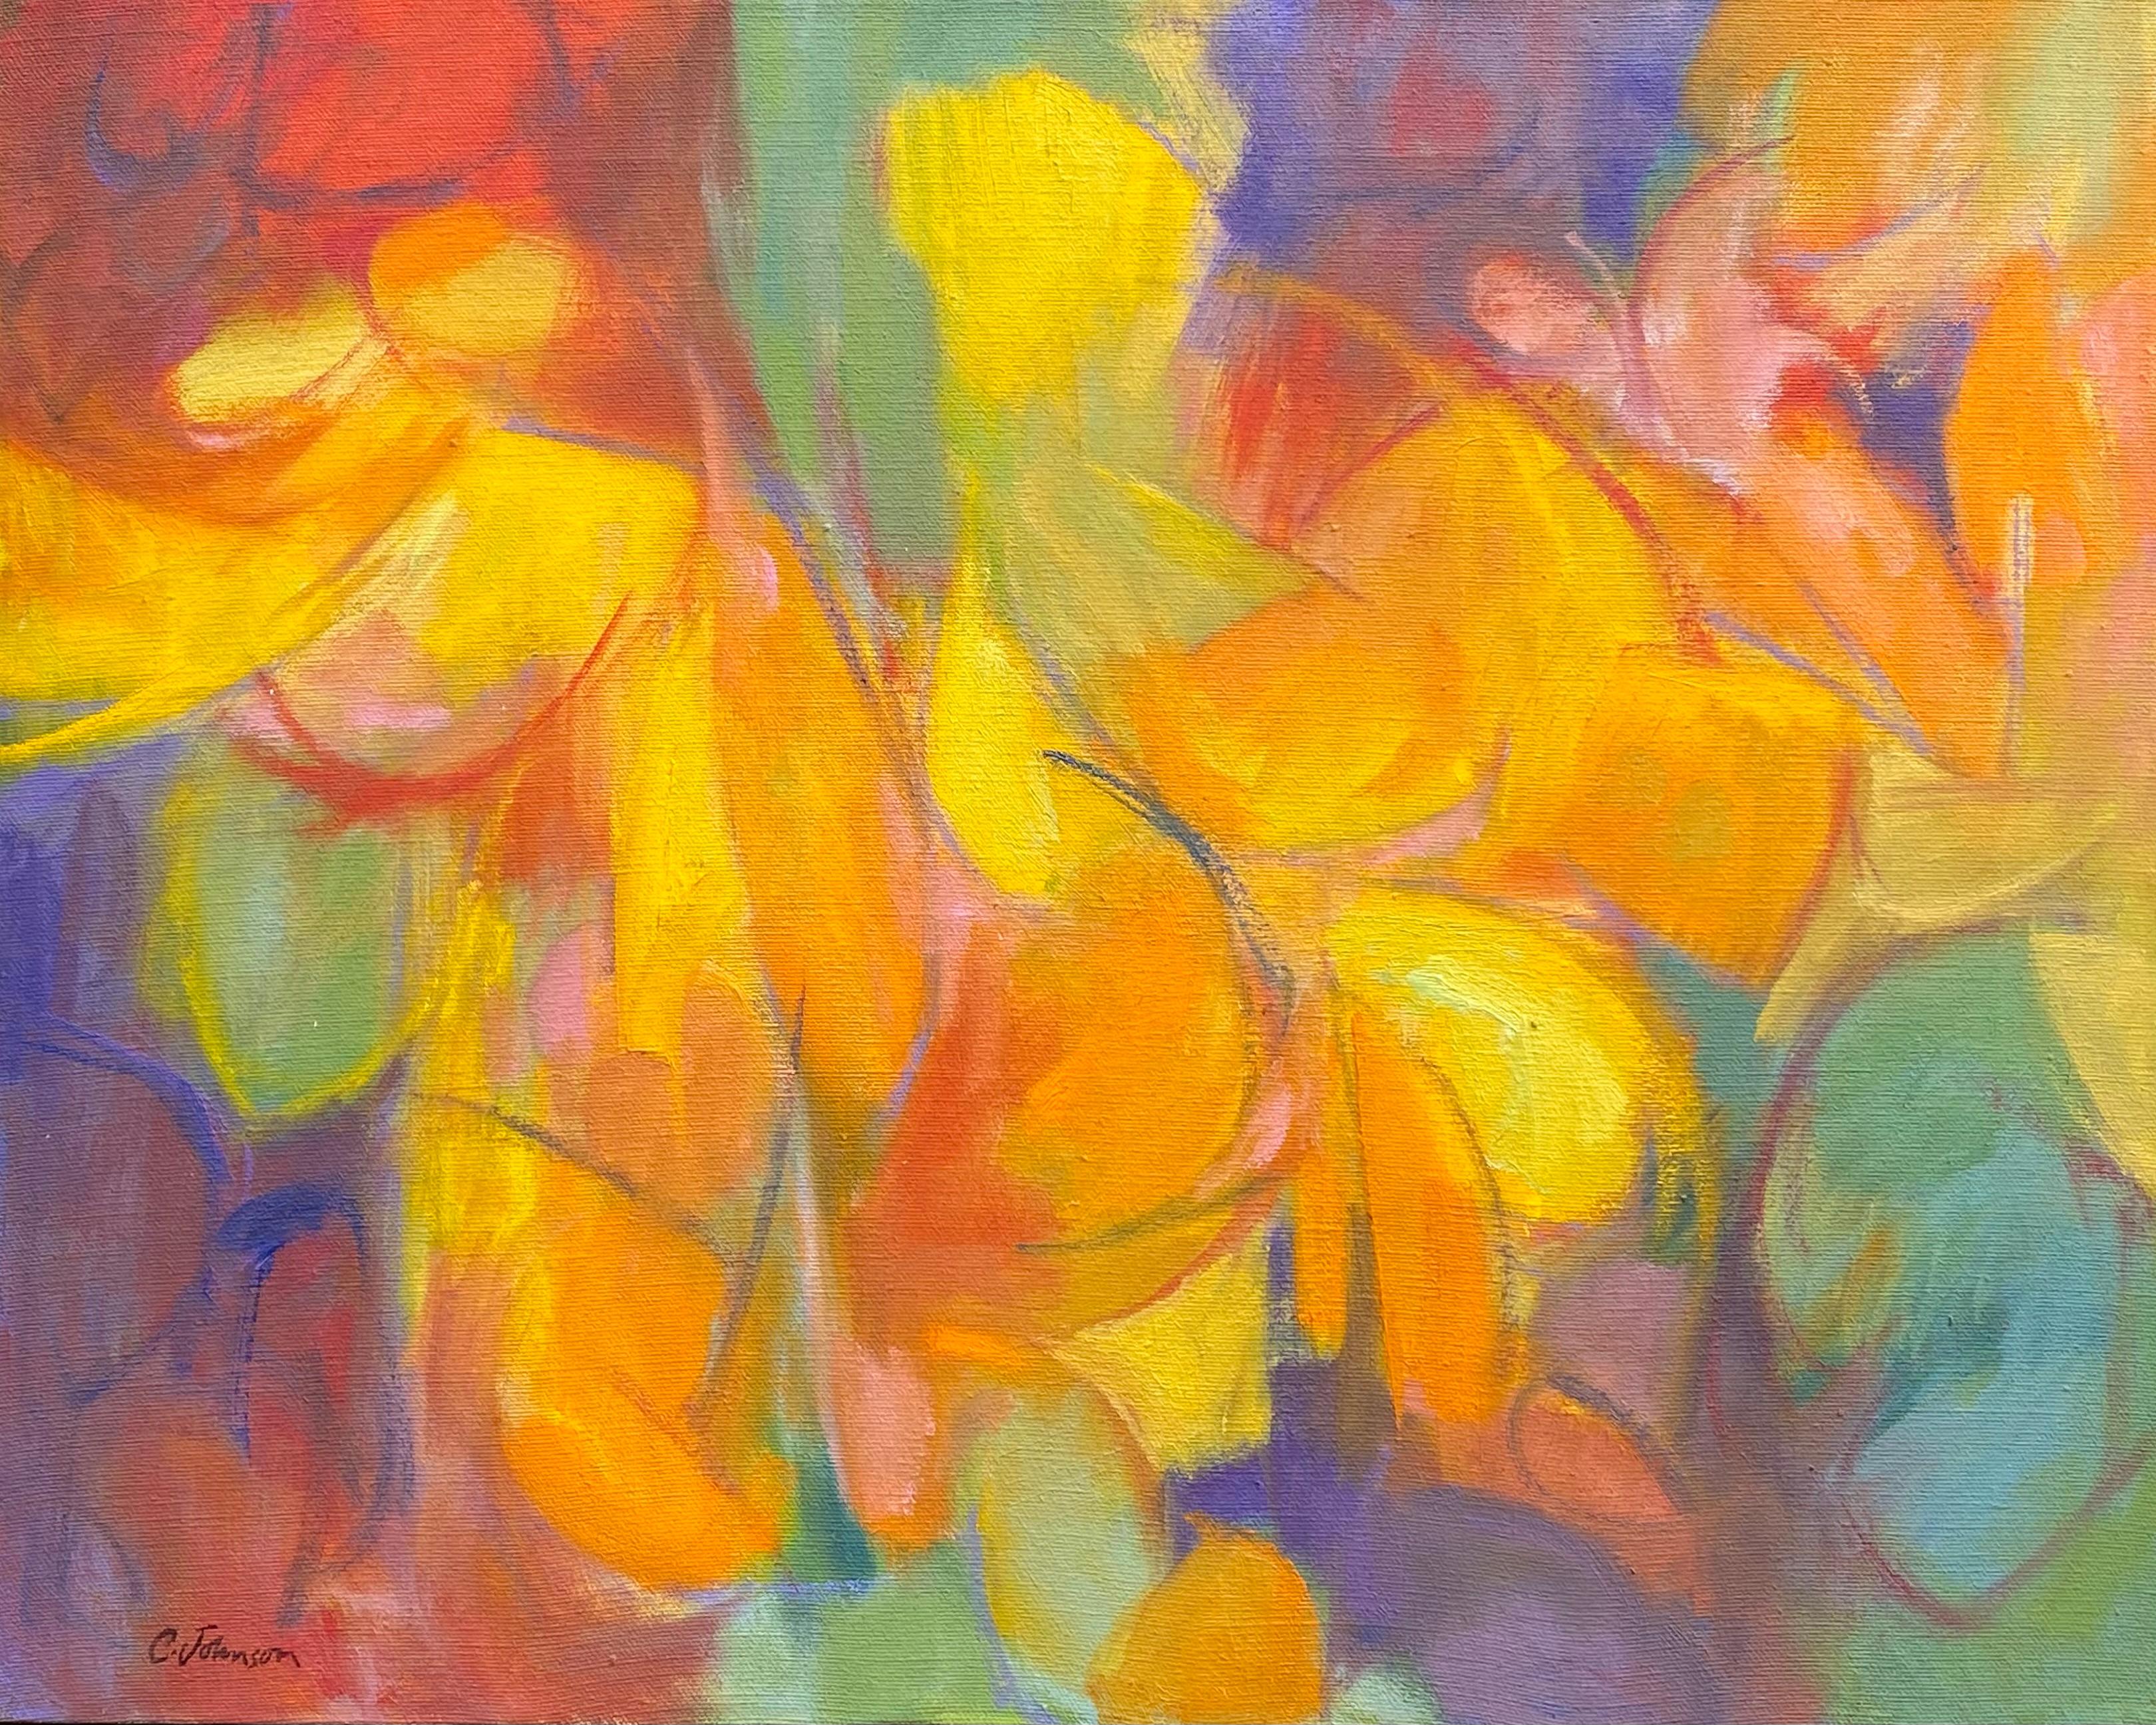 Clifford Johnson Abstract Painting - “Oranges”